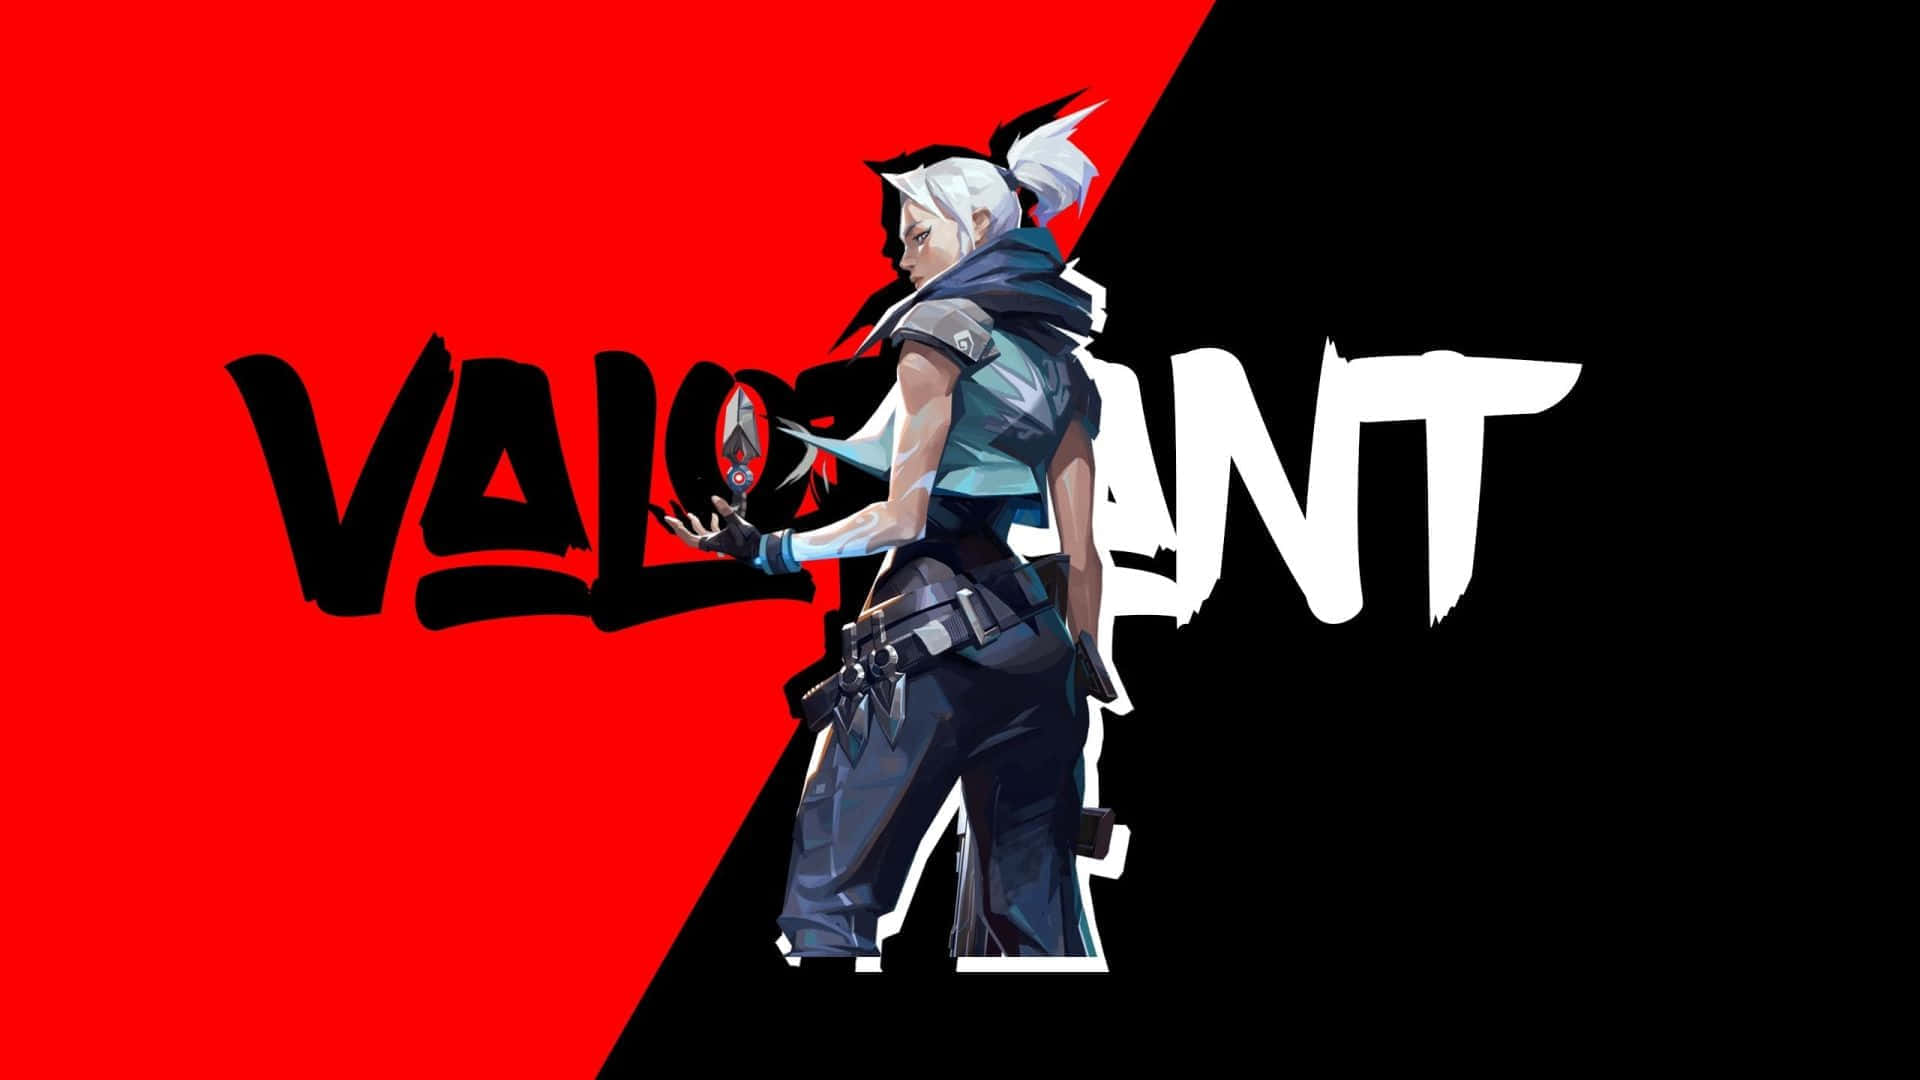 Ready your weapons and join the battle, in Riot Games’ newest shooter: Valorant.